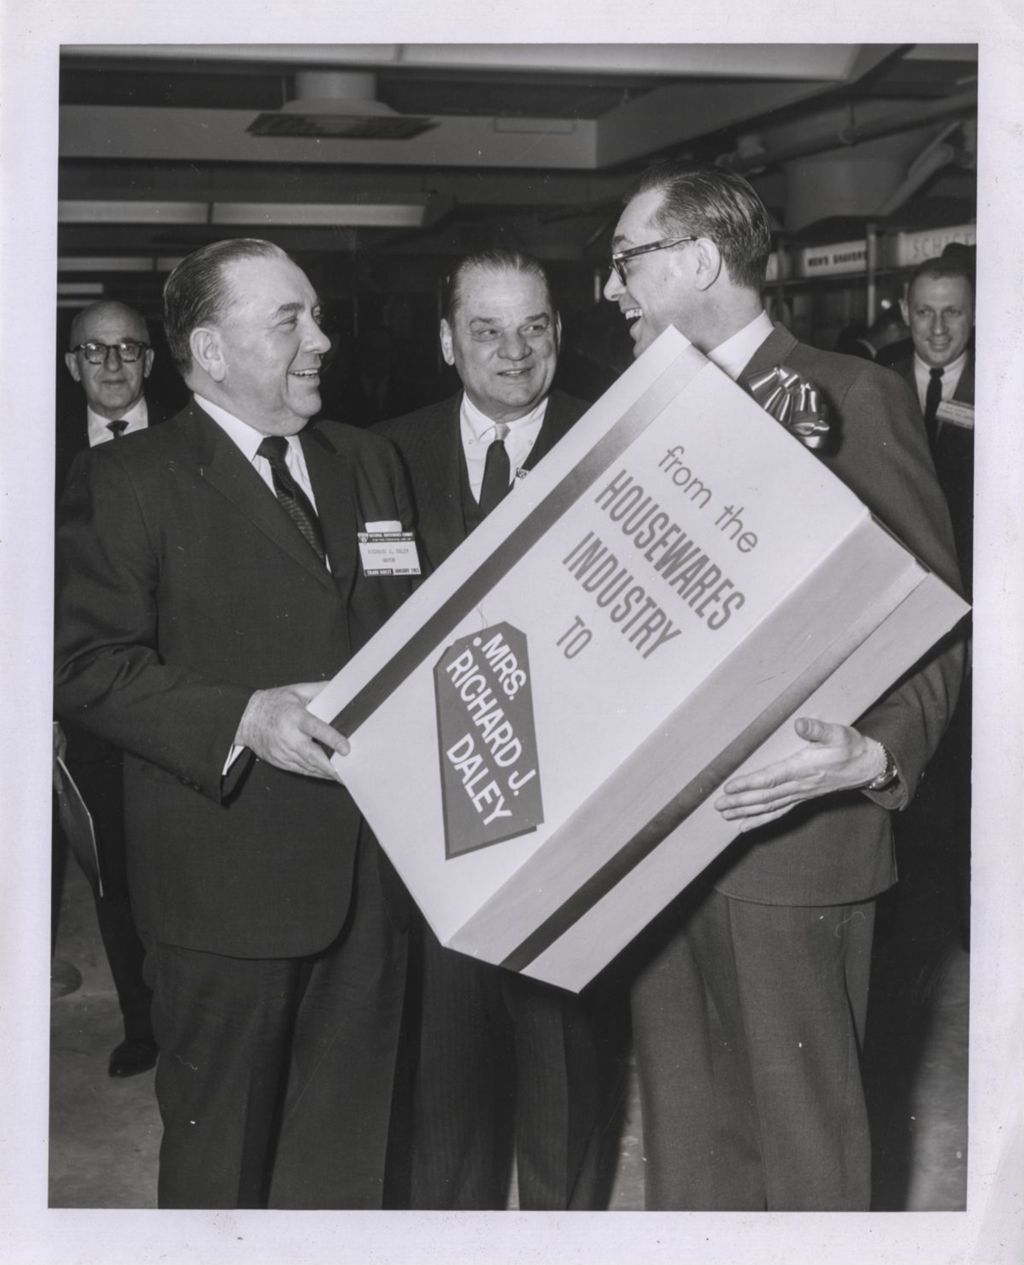 Richard J. Daley accepting gift for Eleanor Daley at National Housewares Exhibit